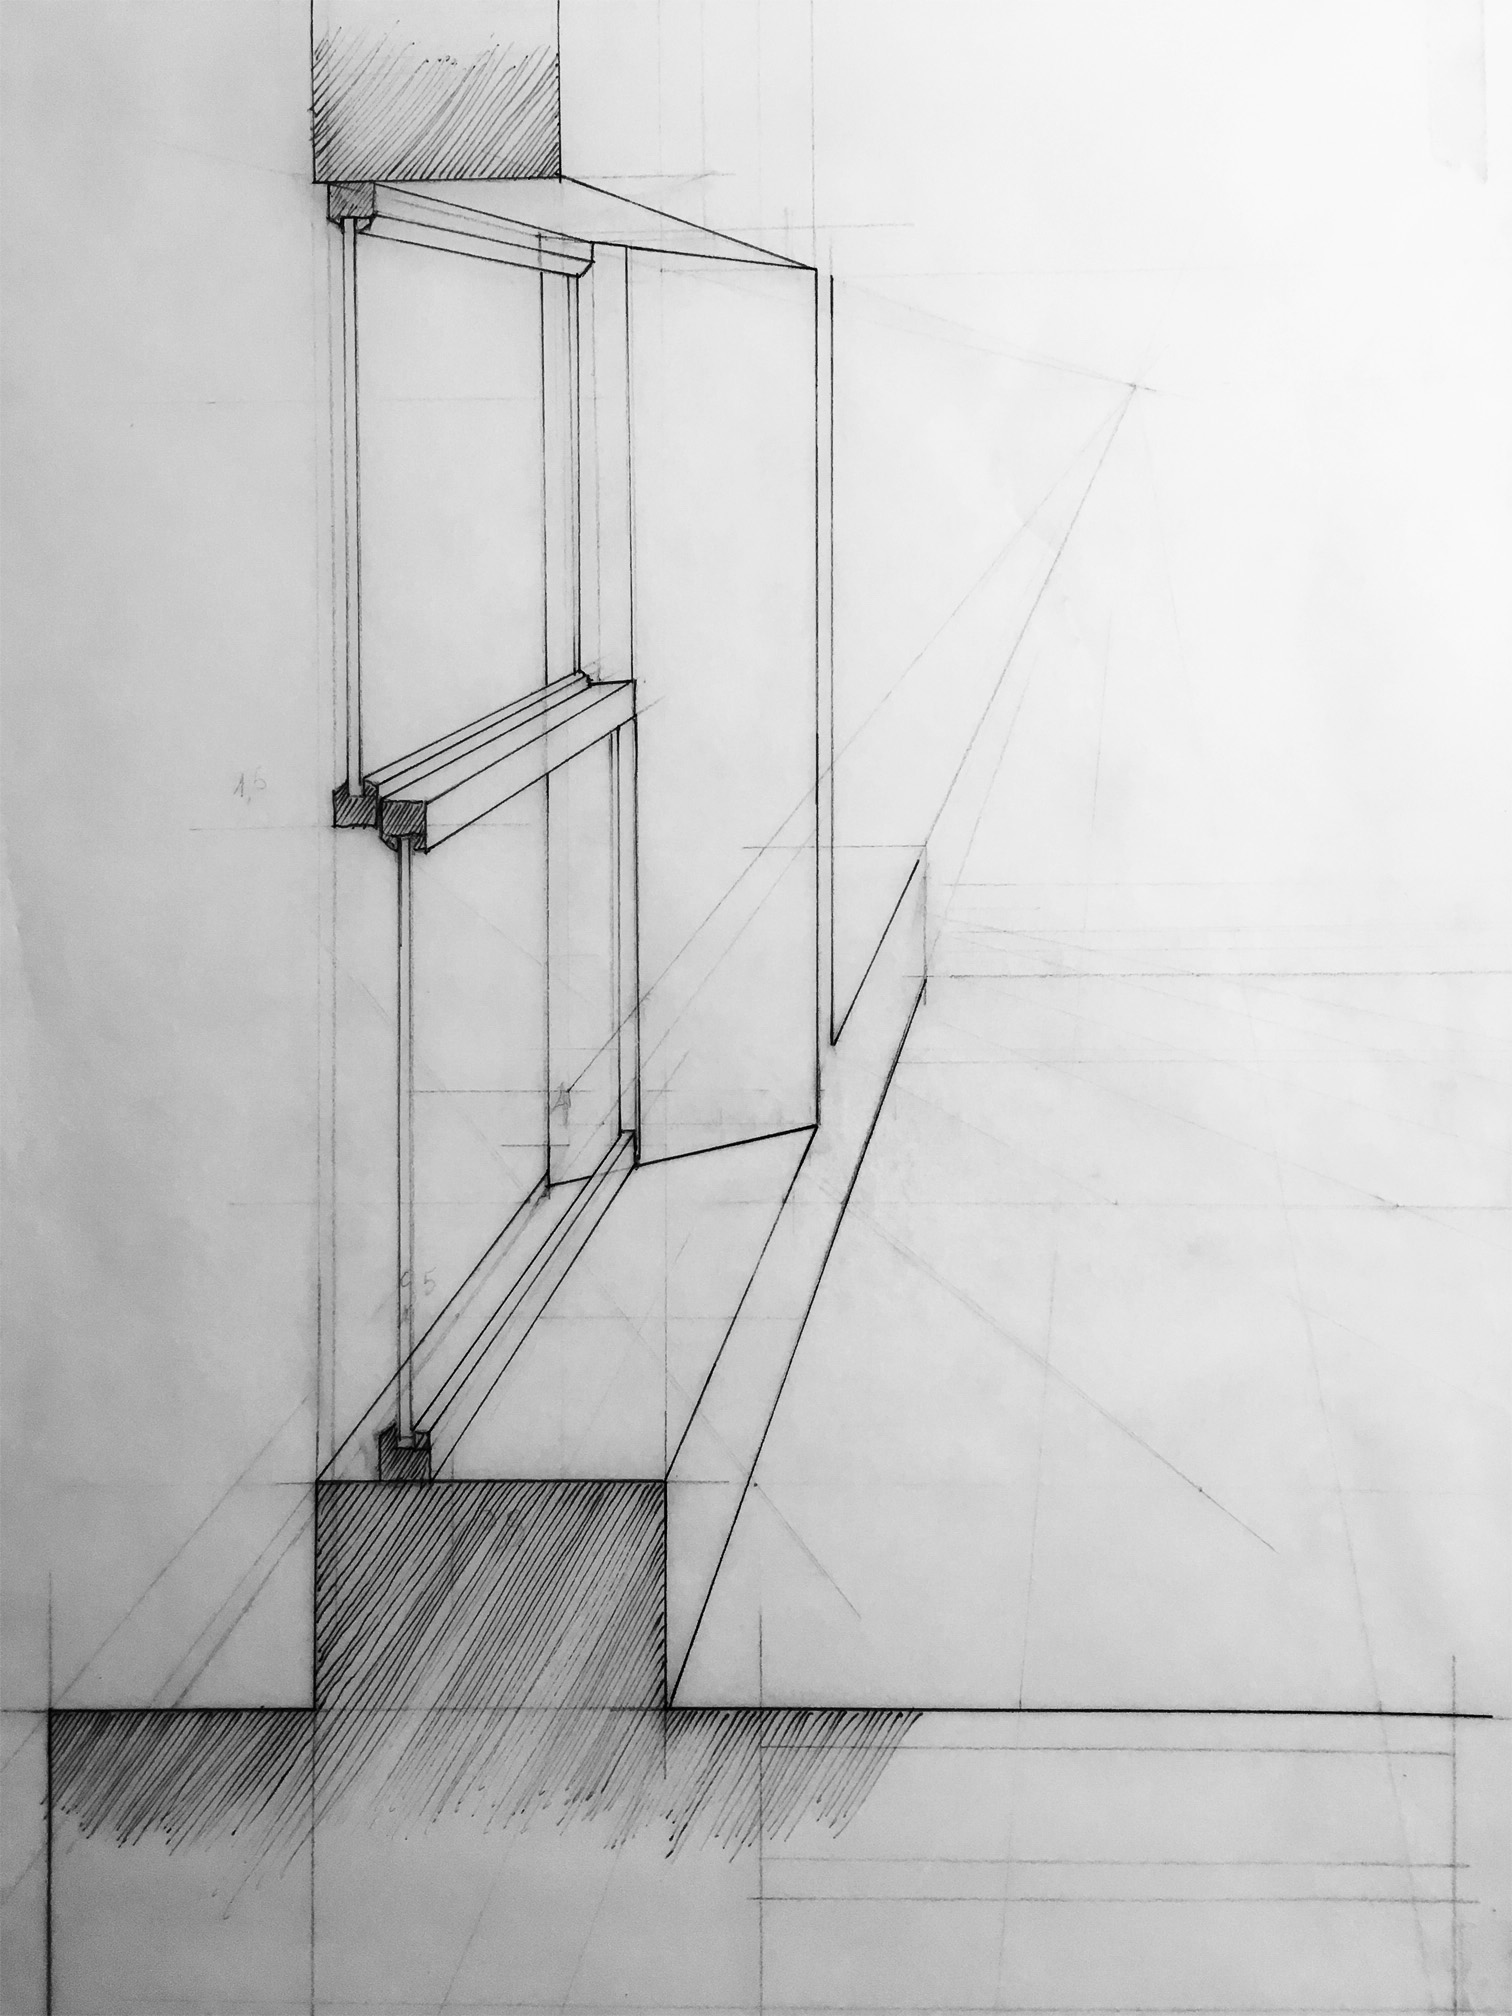 Sketch, The Window, pencil and pen on tracing paper